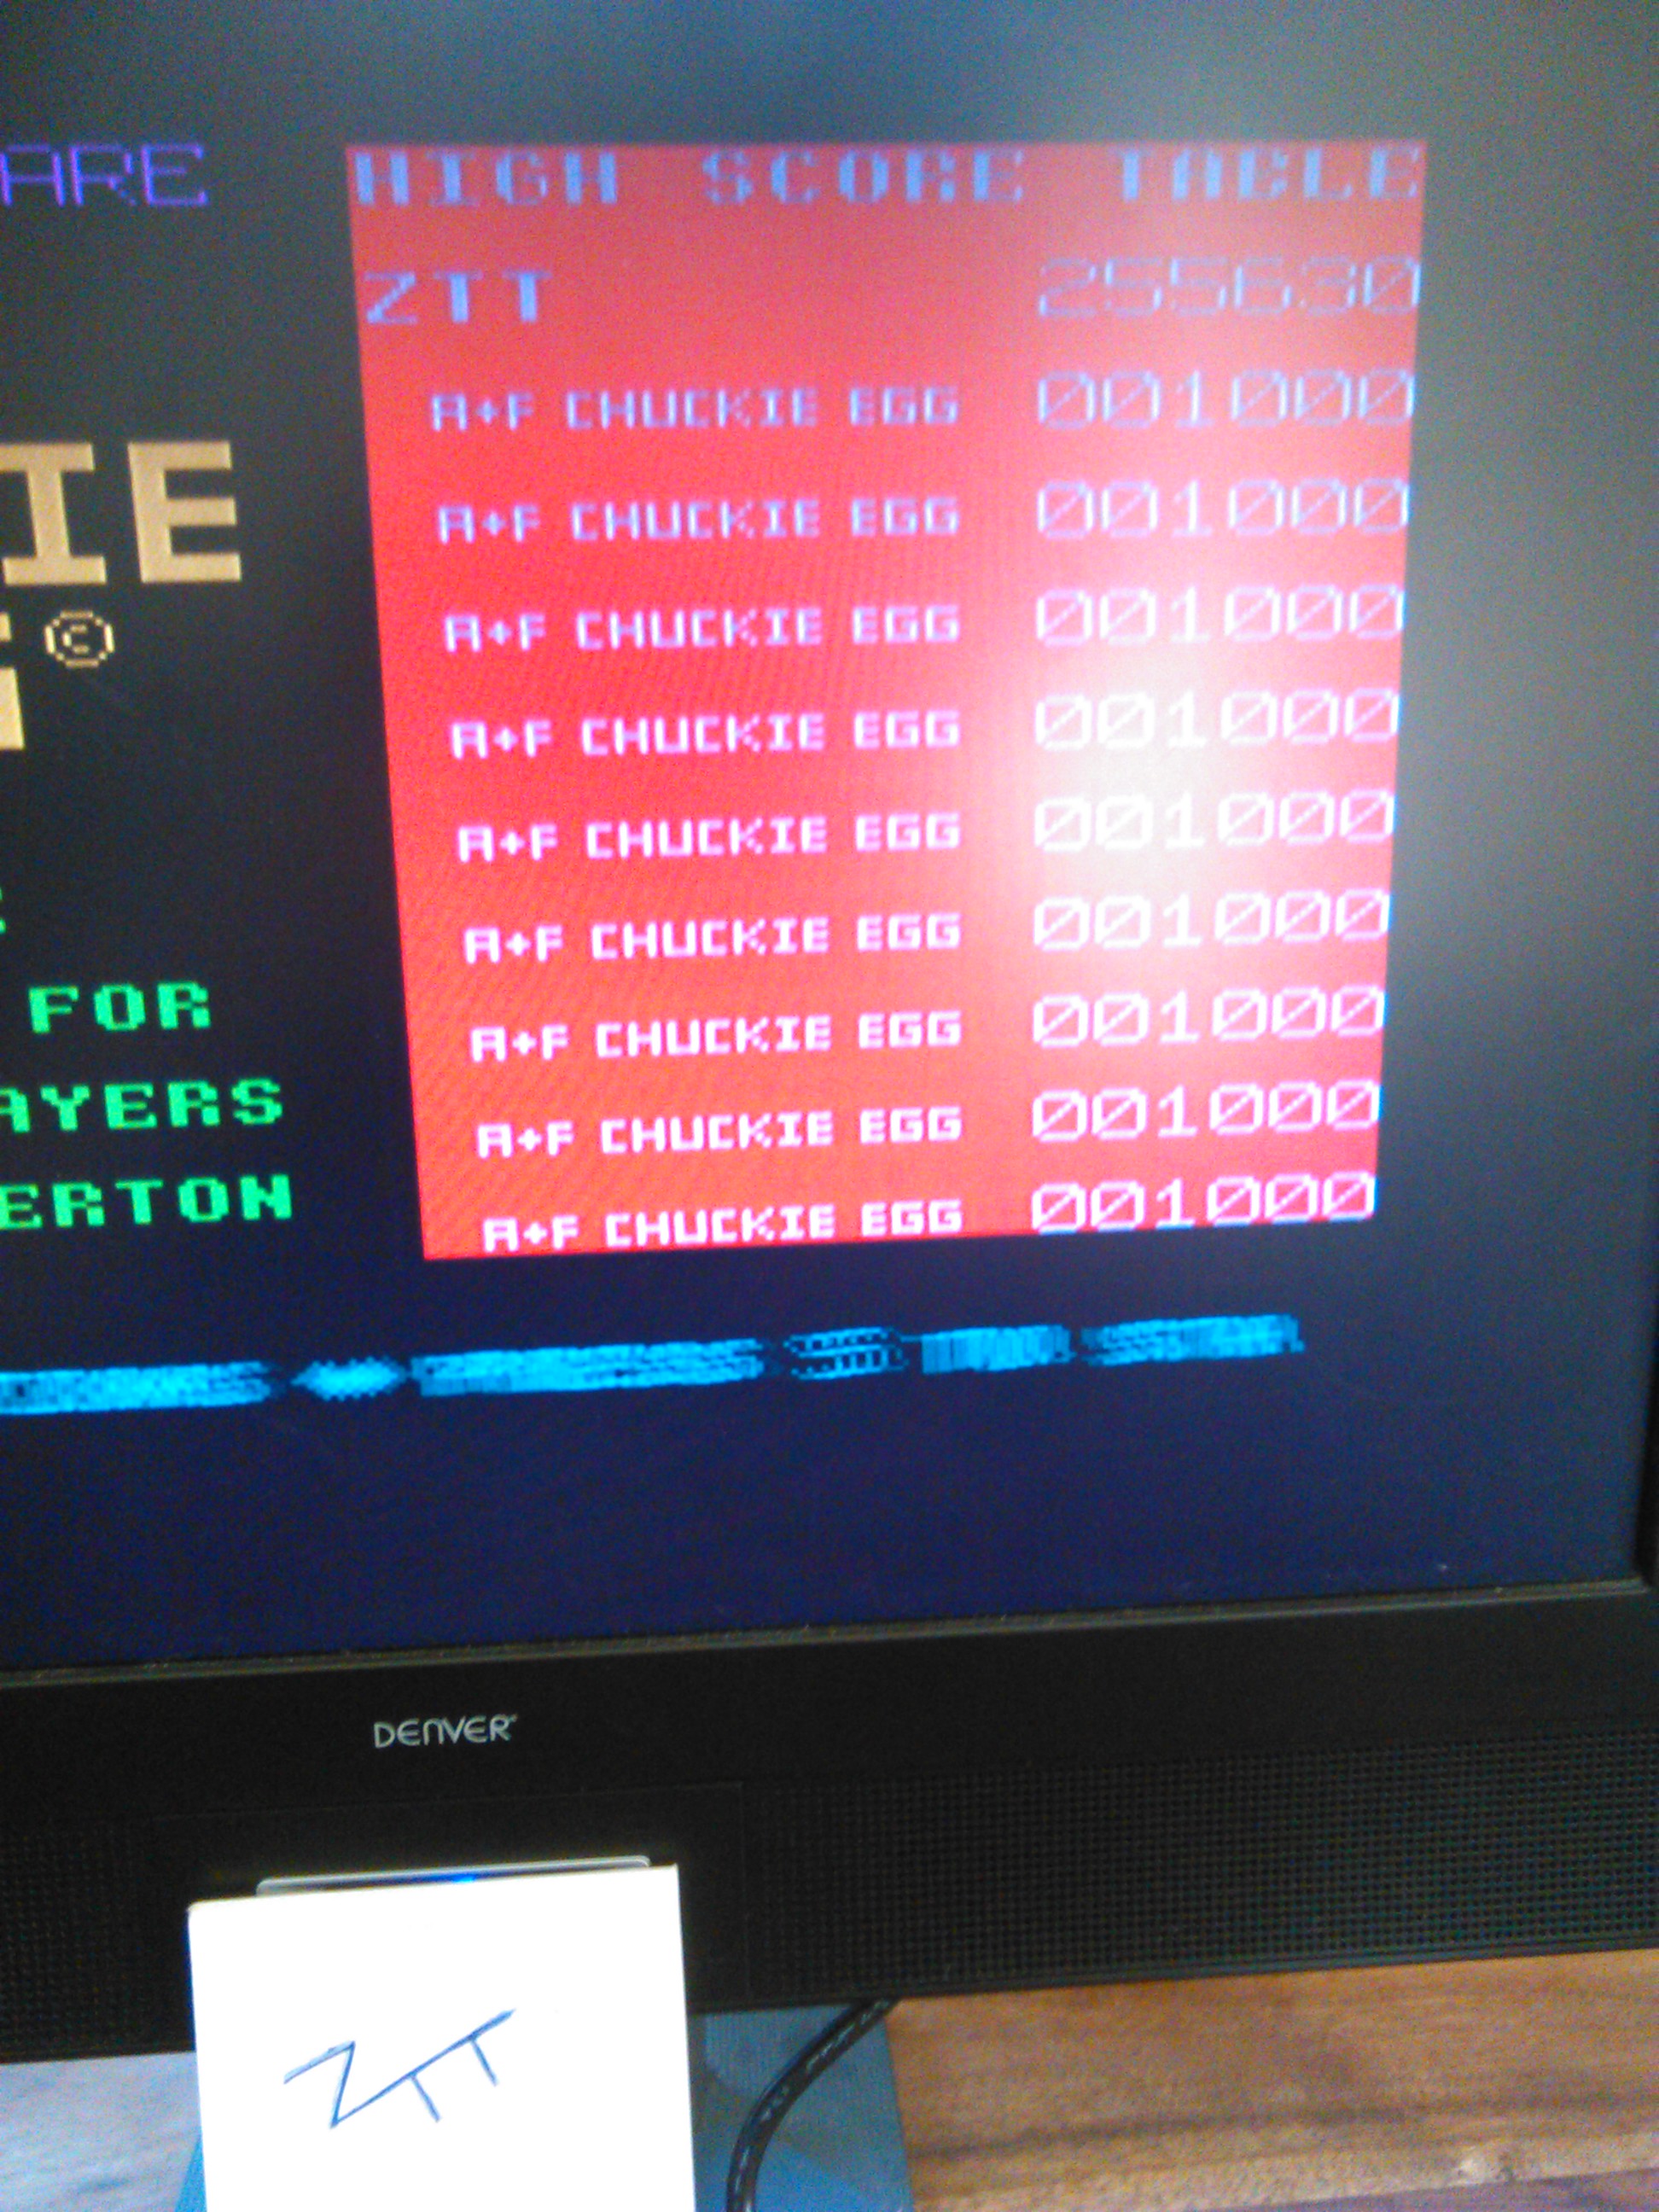 Chuckie Egg 255,630 points